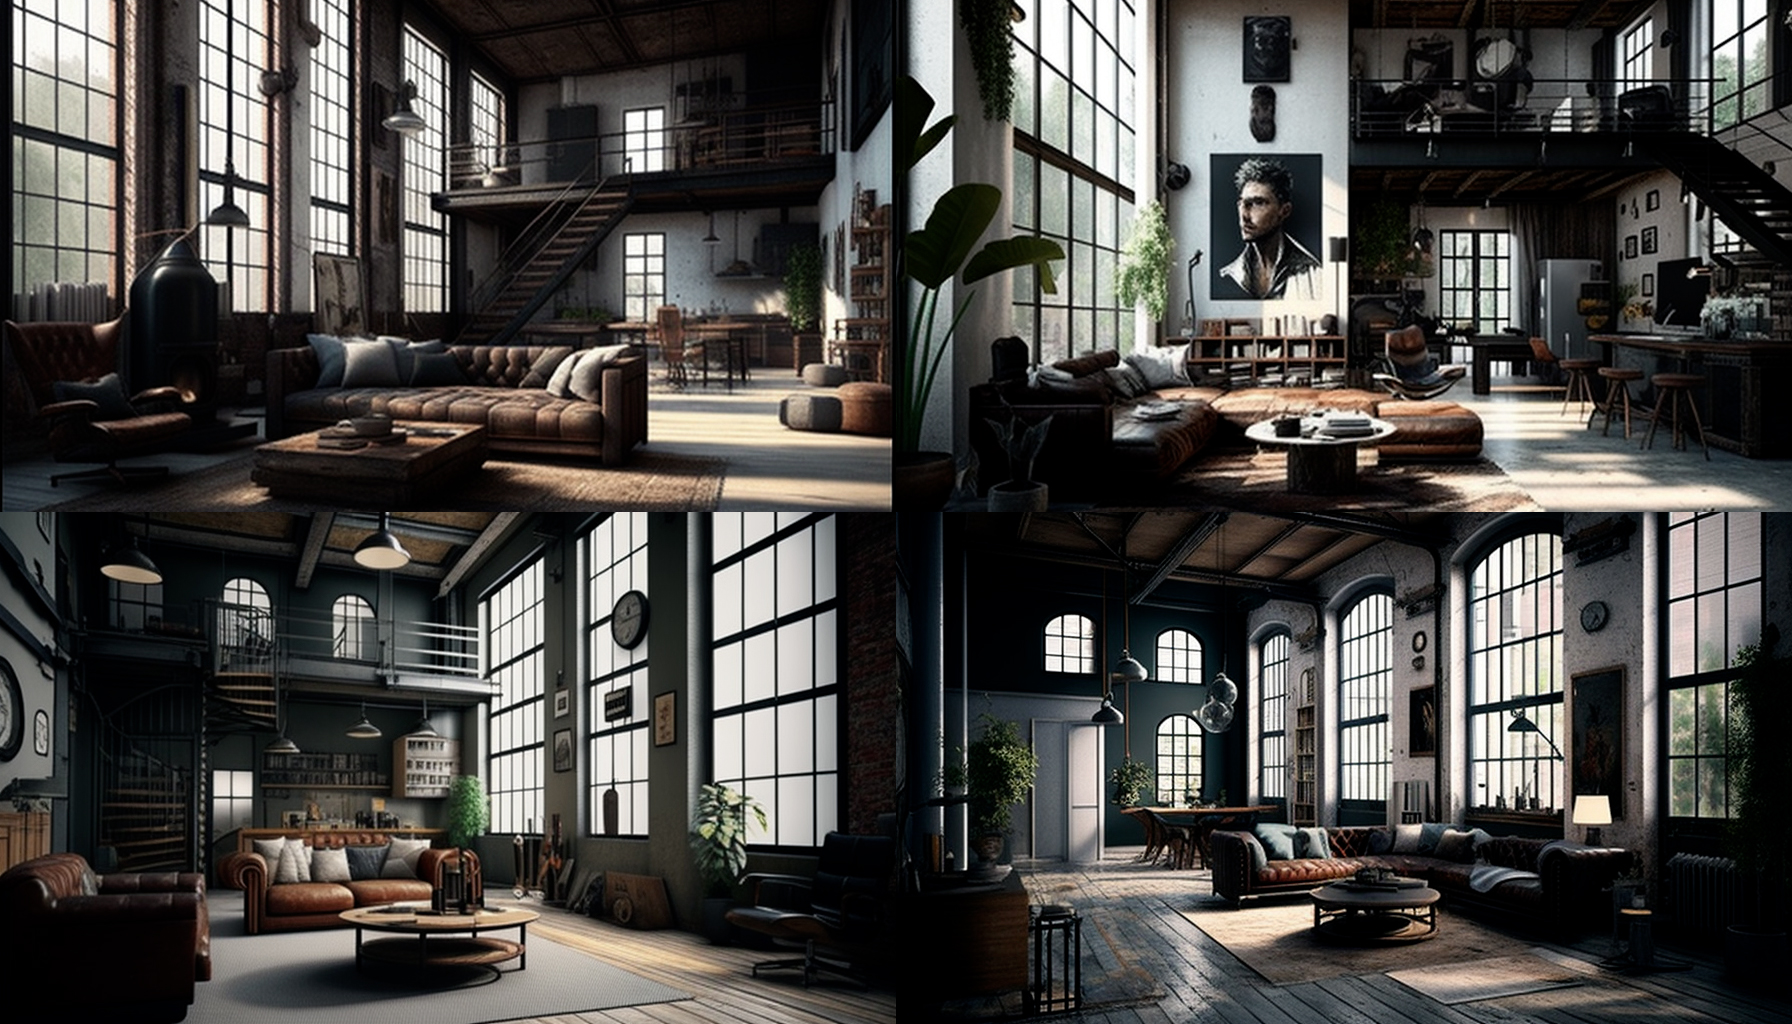 PaintRight - Get the Look: Industrial (Interior Design) Styling